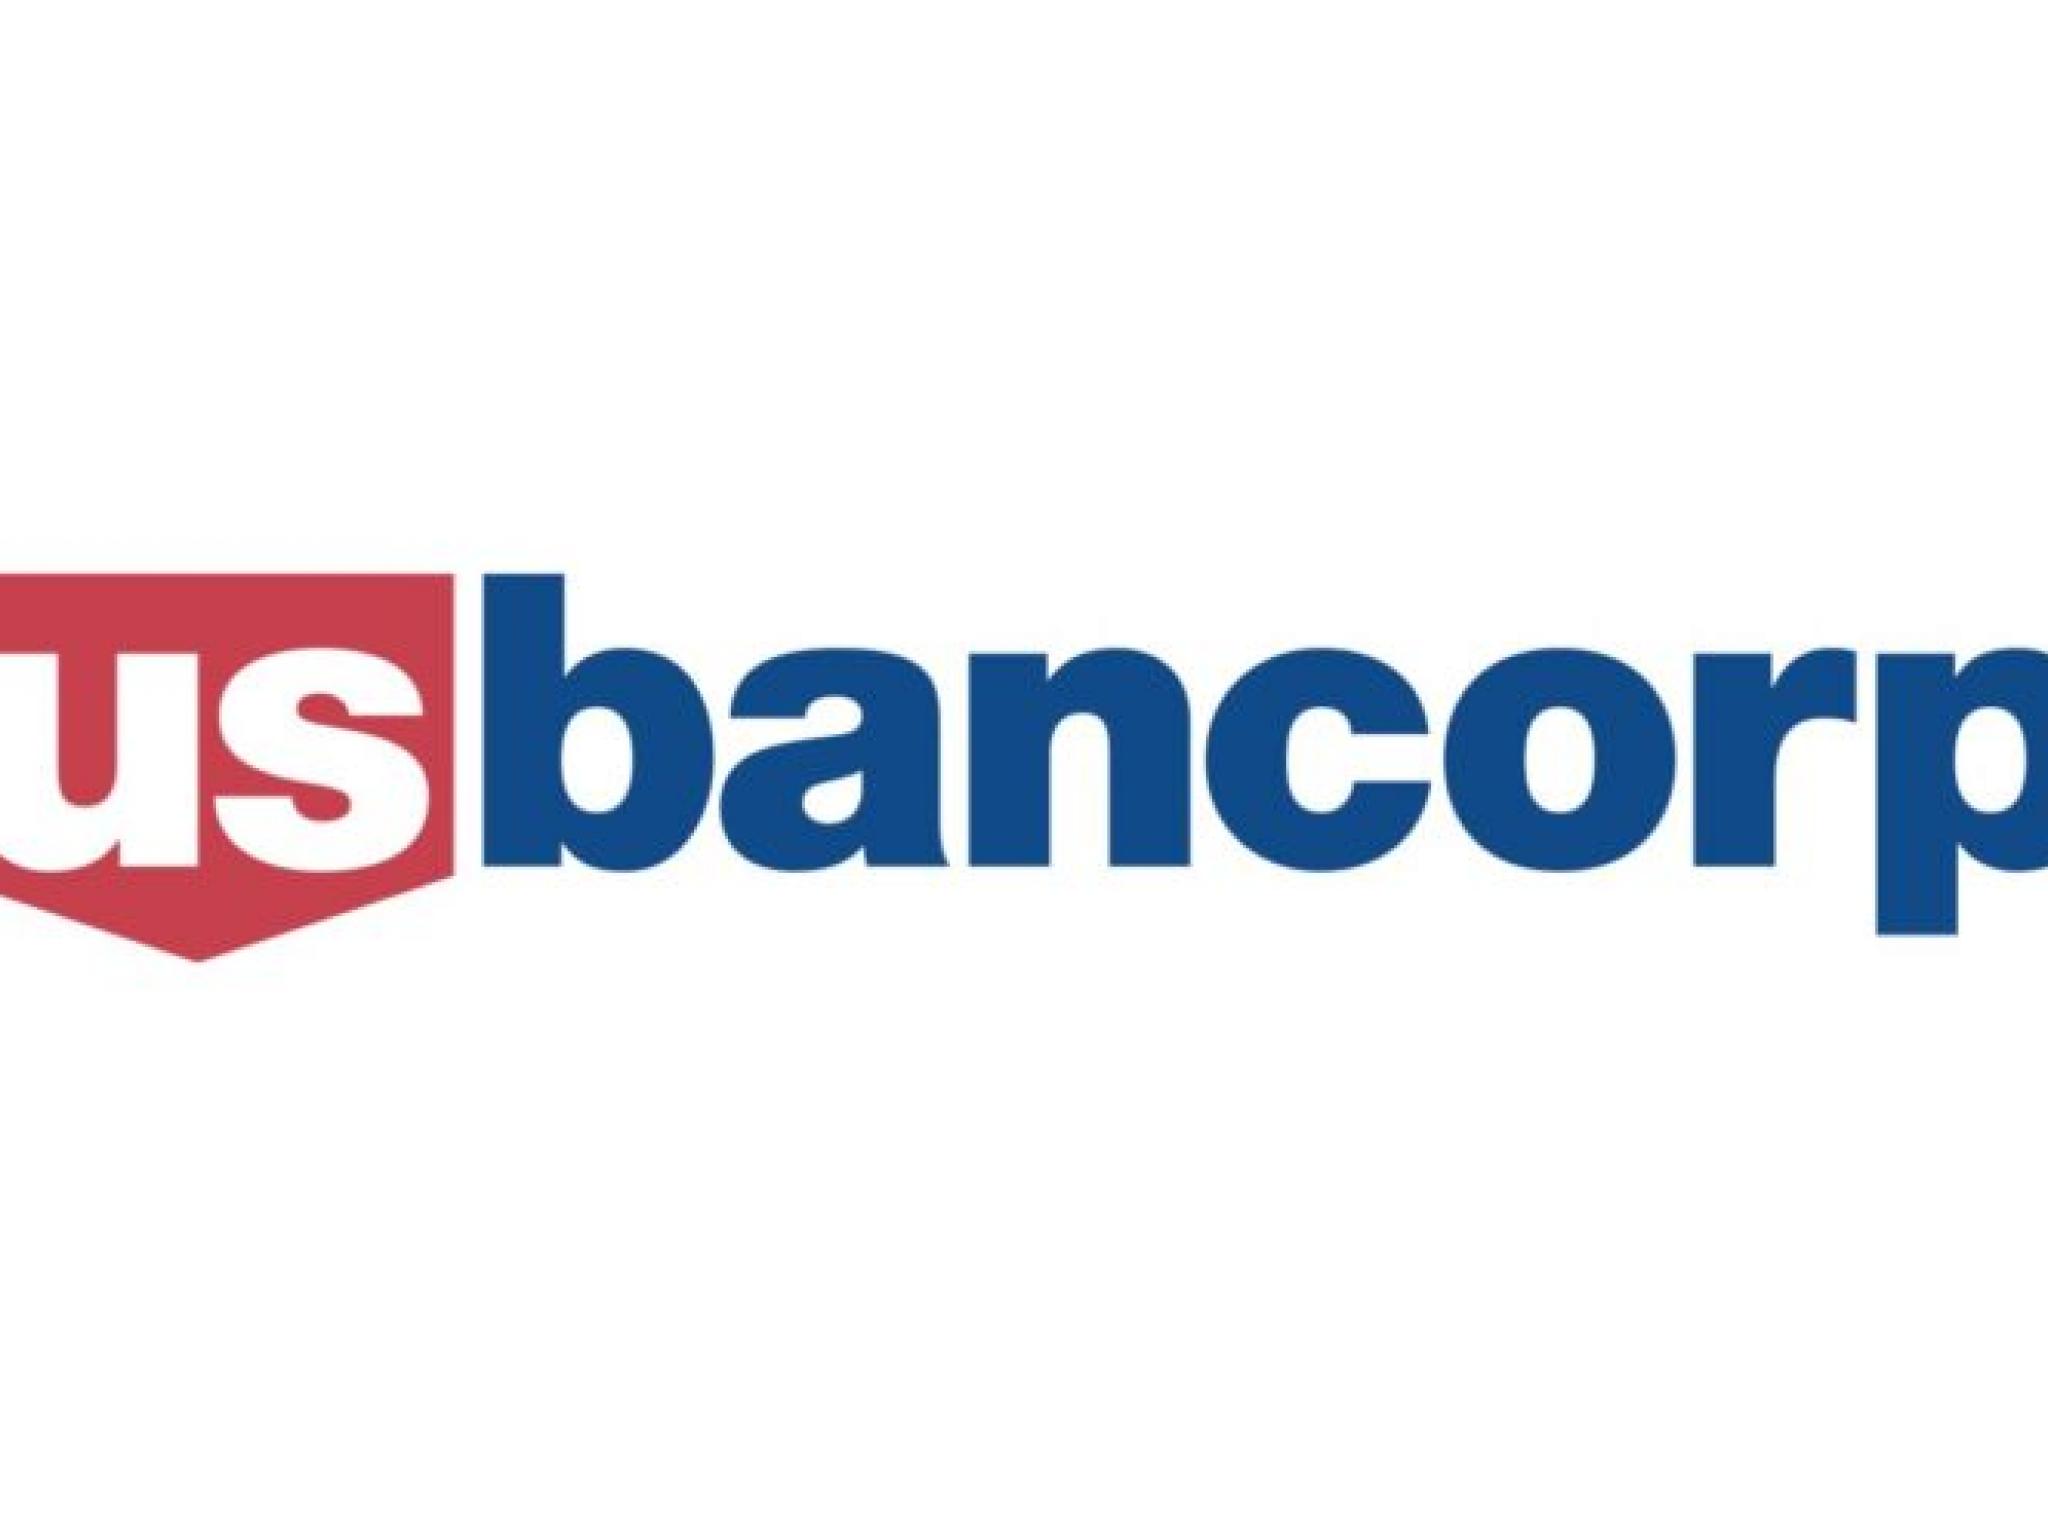  these-analysts-cut-their-forecasts-on-us-bancorp-following-q1-results 